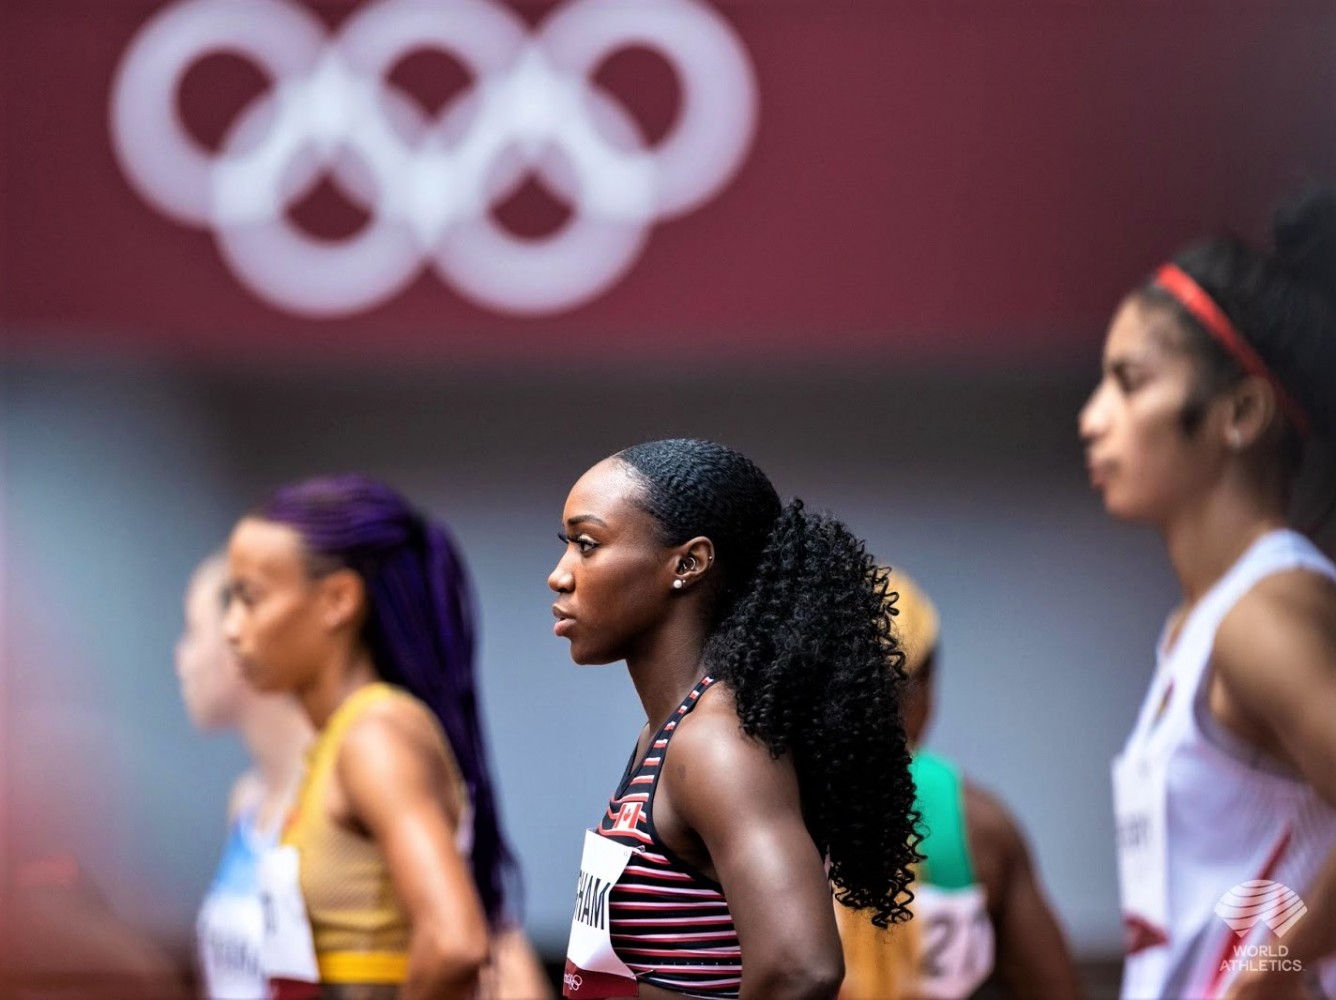 ‘It is not a career for me’: the Olympic side of inequality in women’s sports